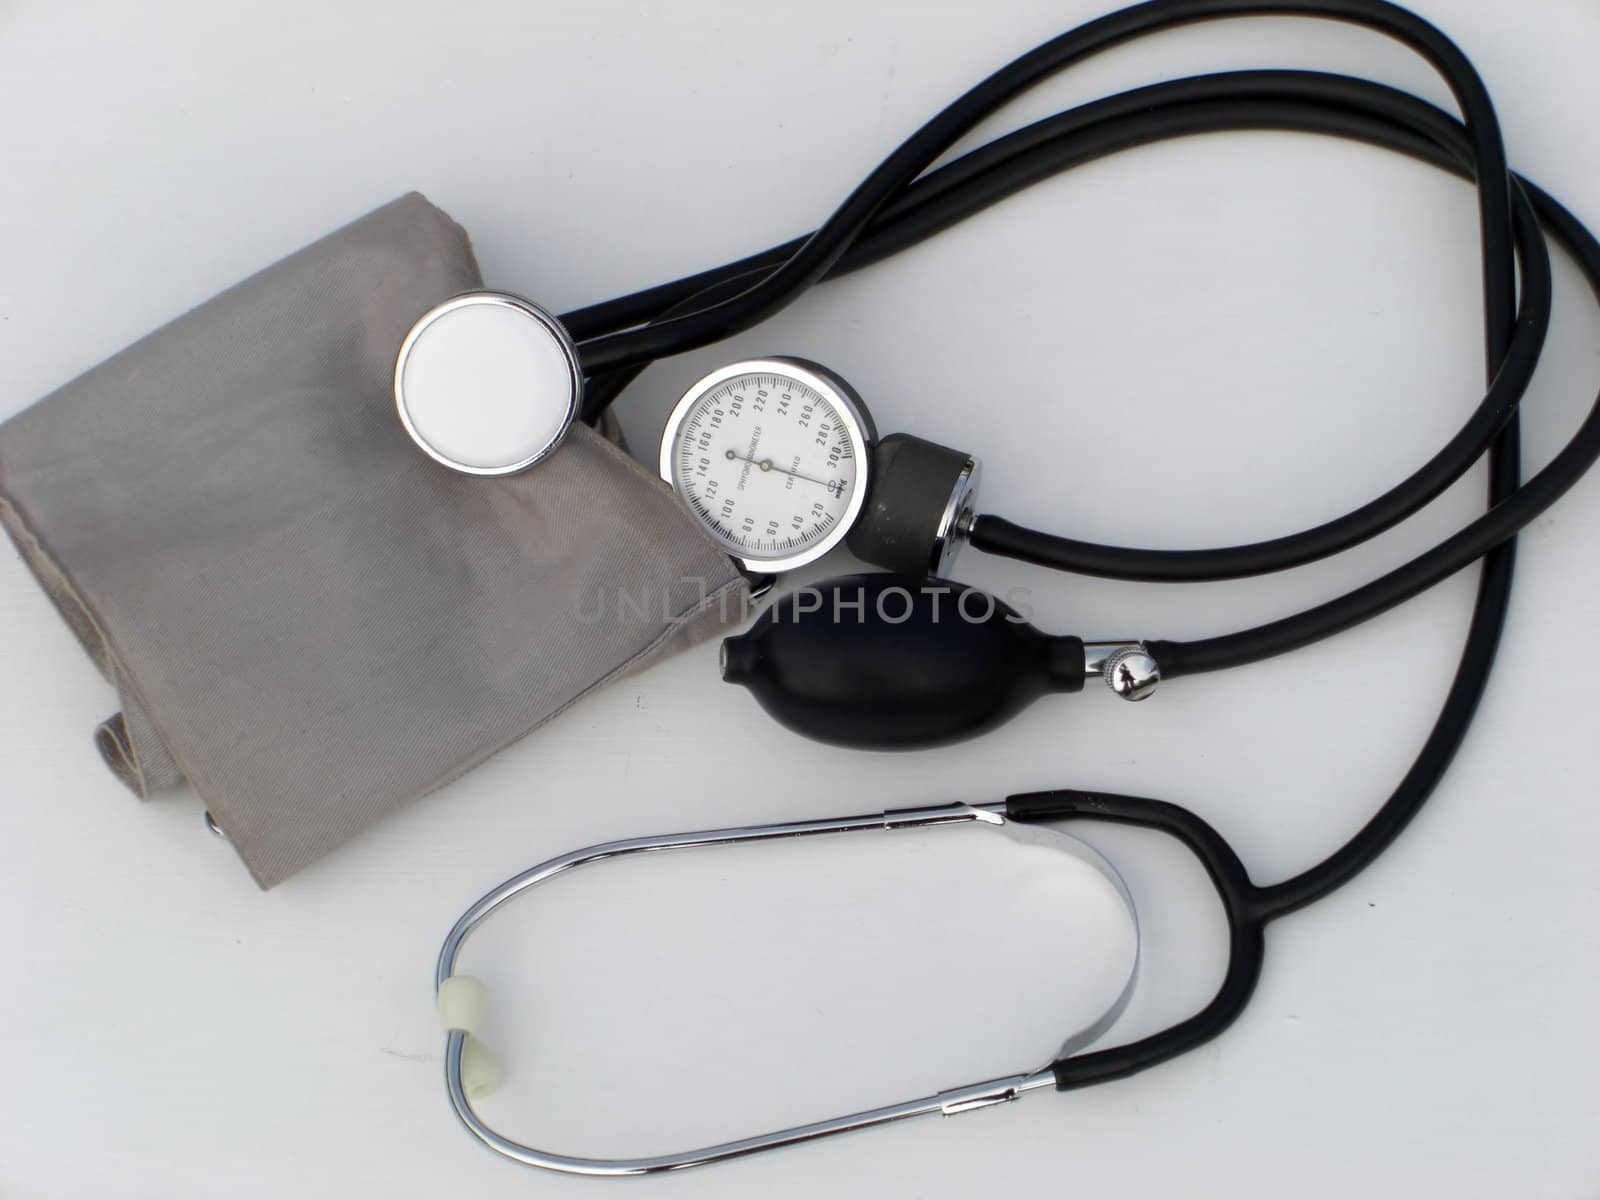 this is a blood pressure monitor that is used by Doctors and Physicians to monitor their patient's blood pressure